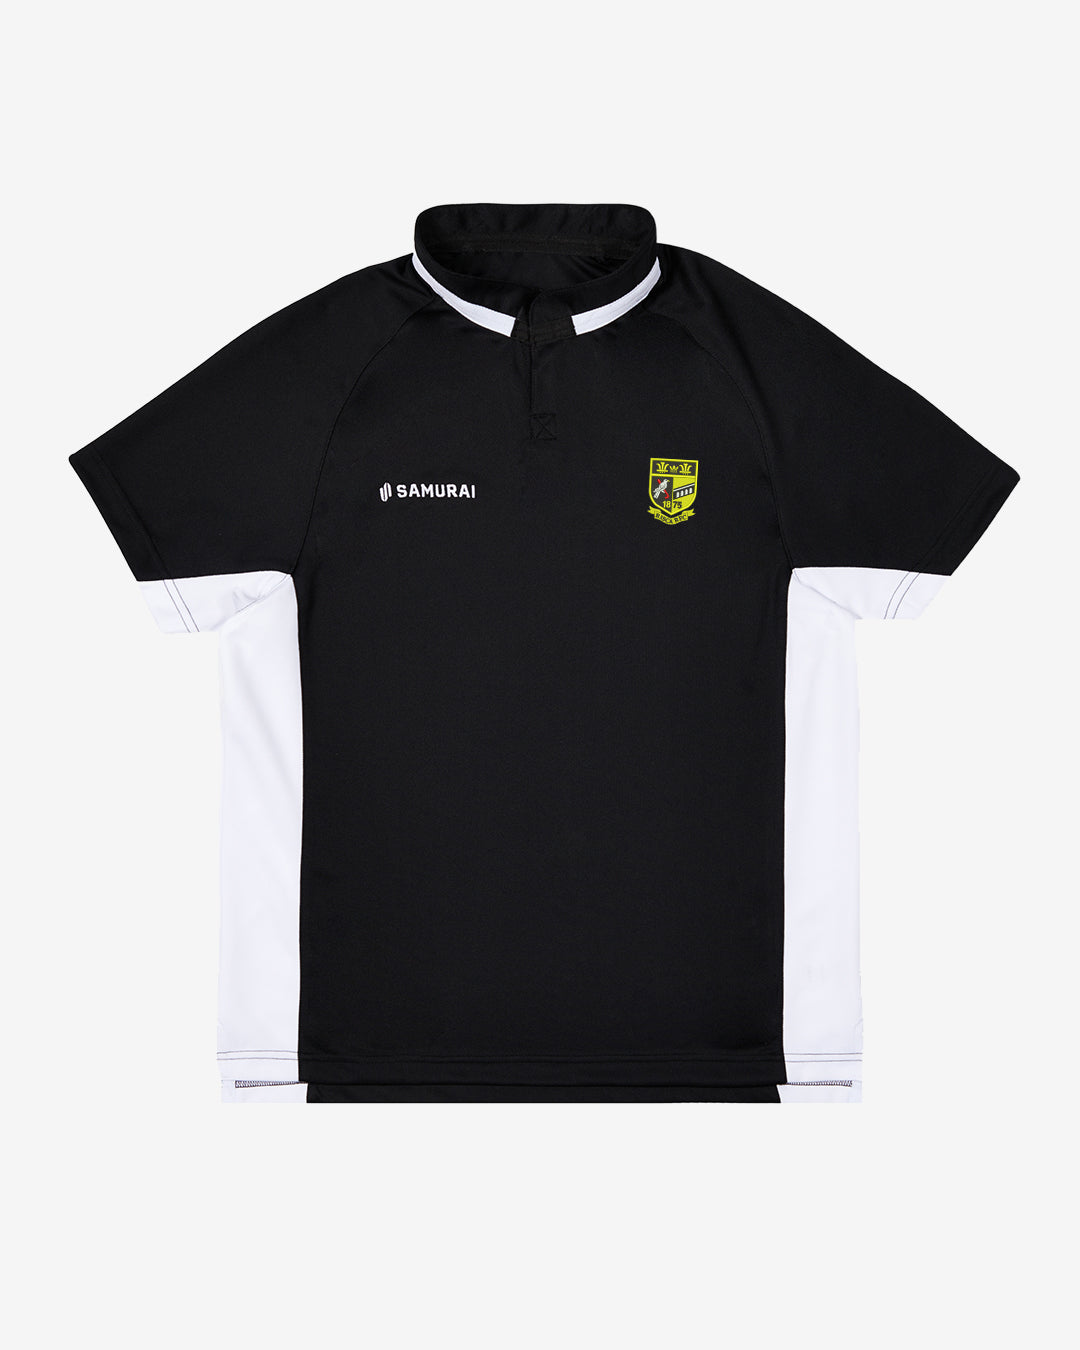 Risca RFC - EP:0109 - Rugby Training Jersey - Black